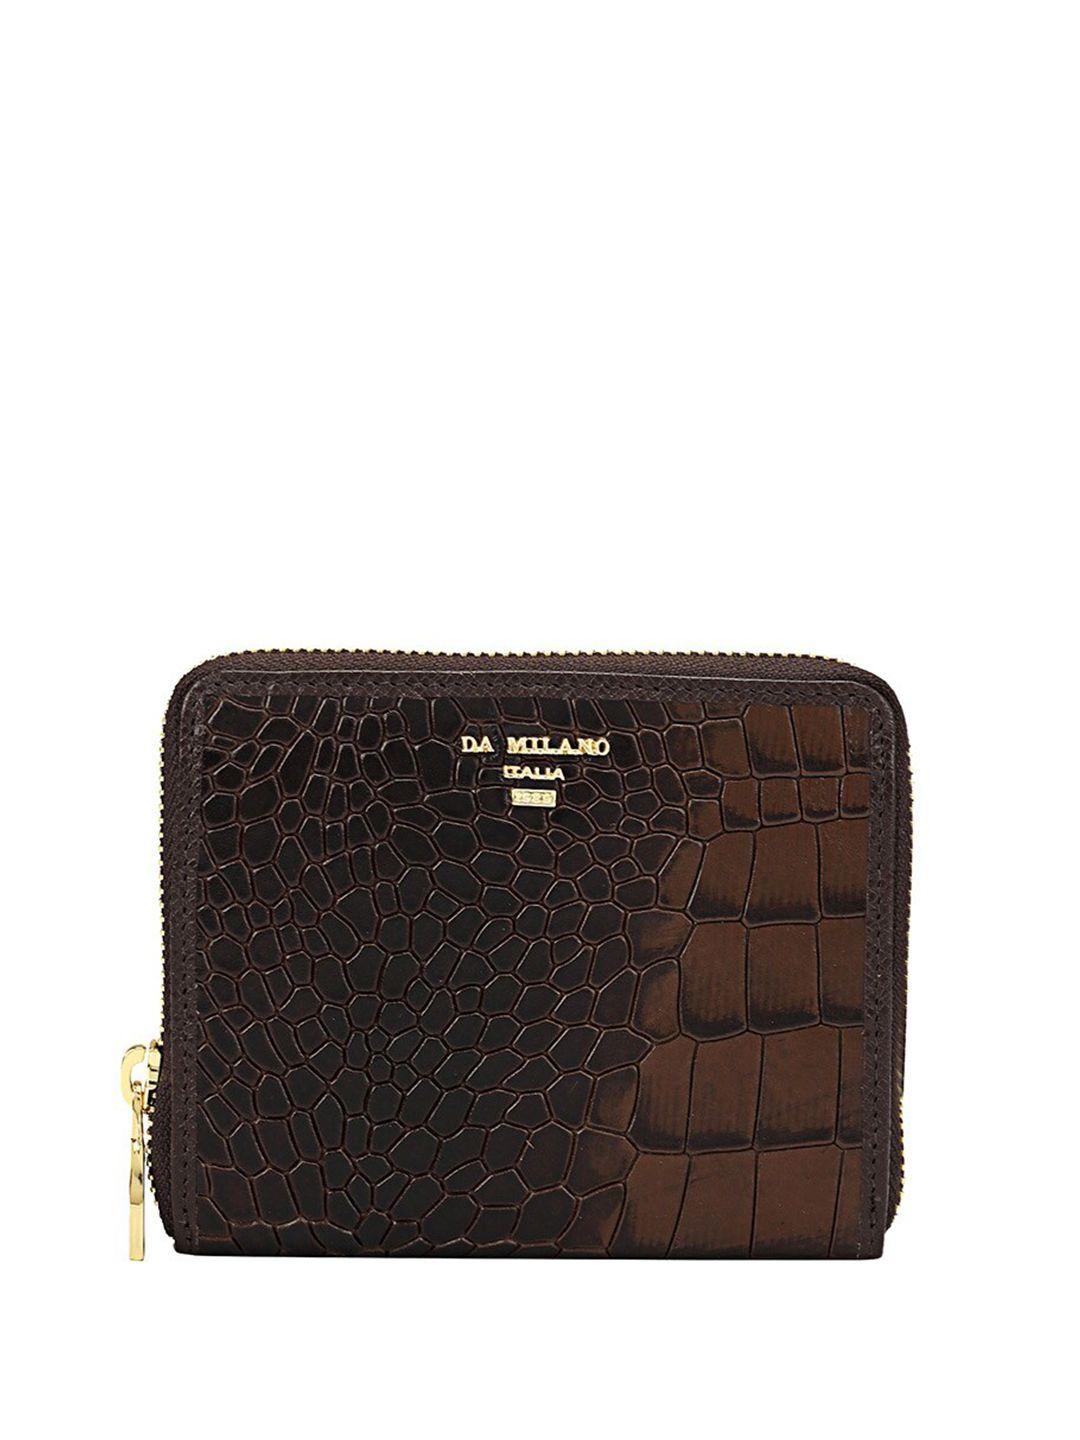 da milano women brown textured leather two fold wallet